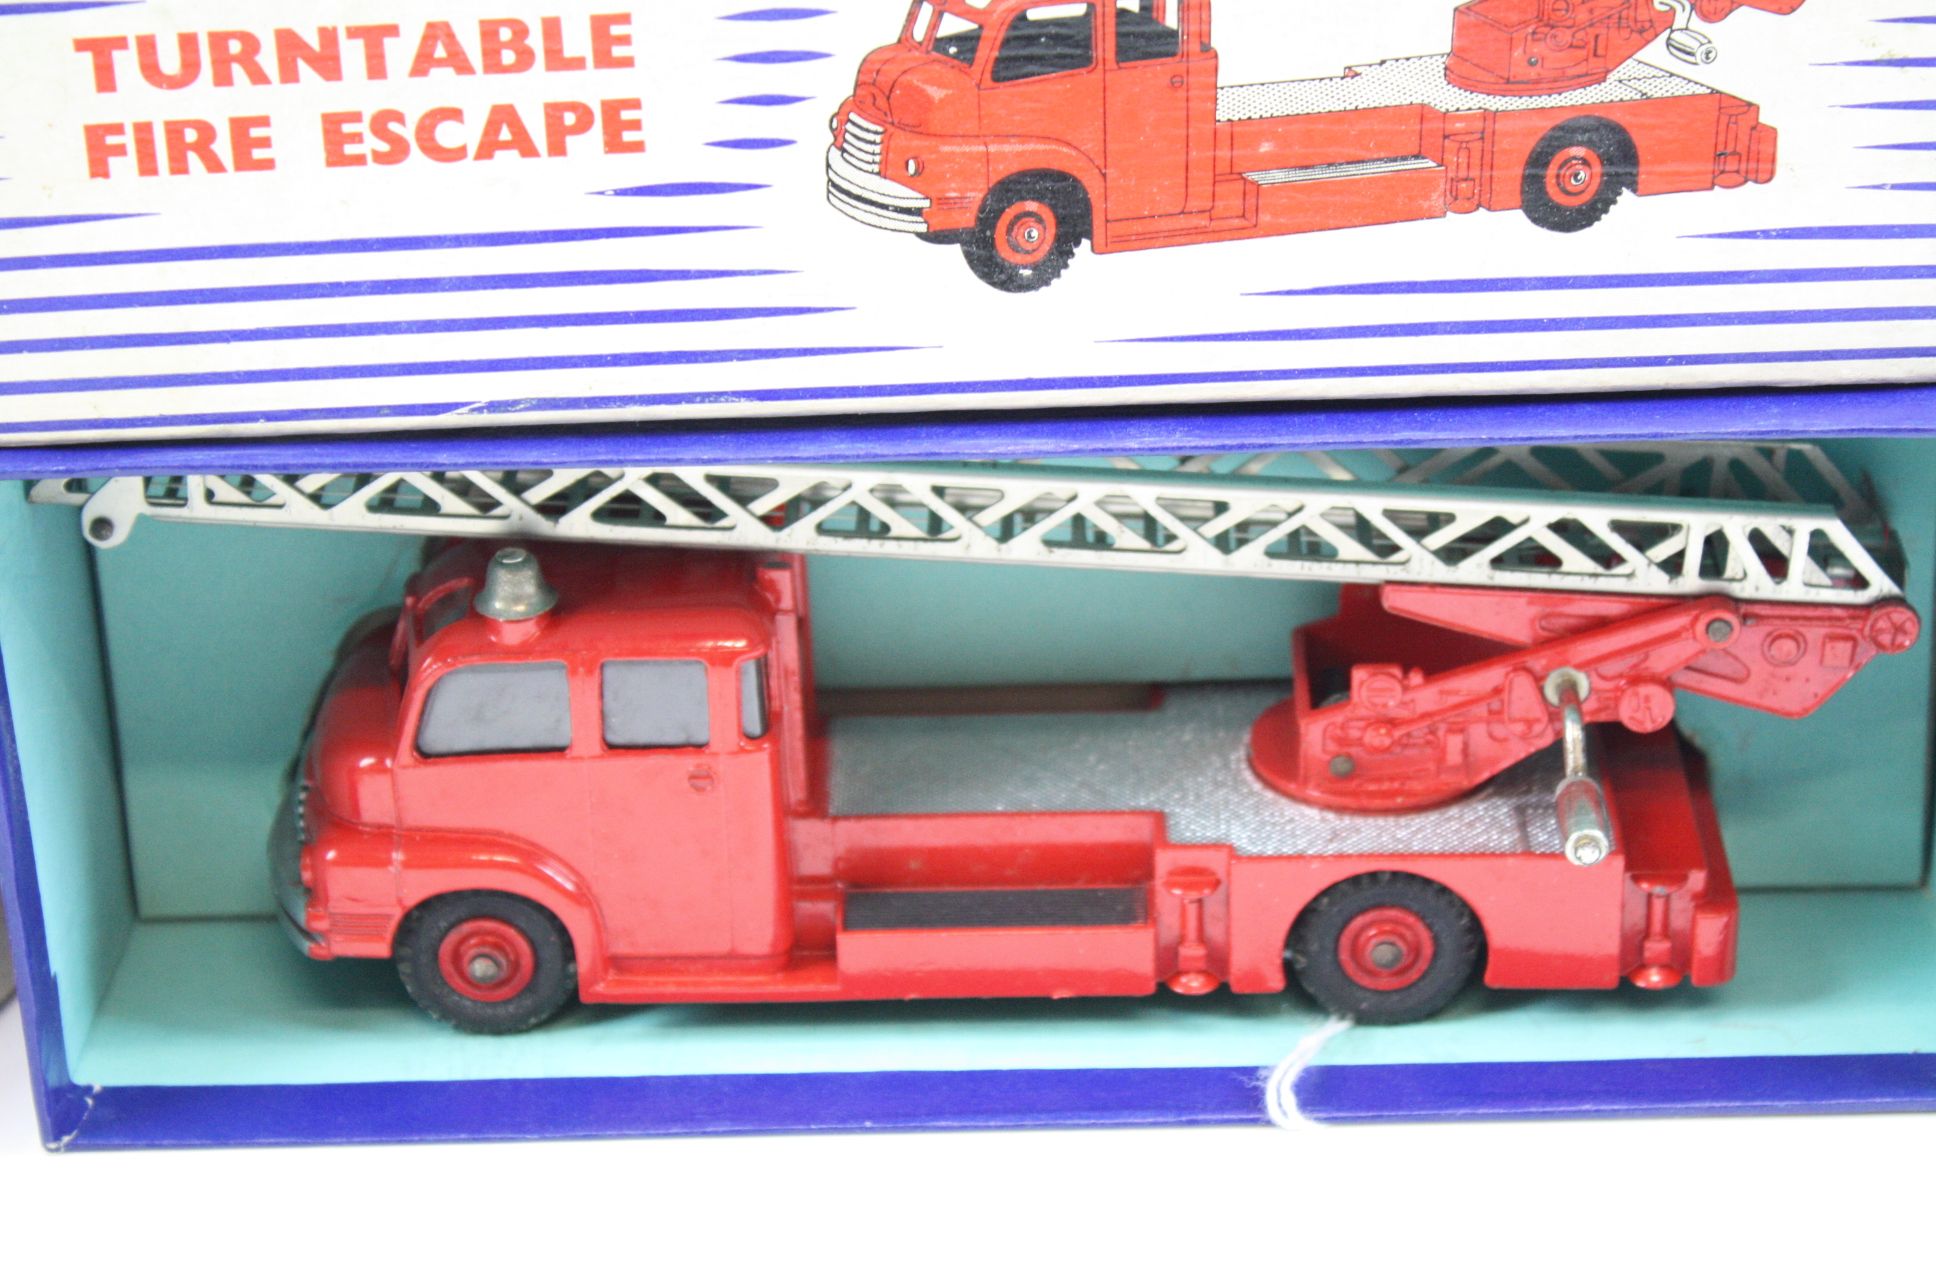 Boxed Dinky 956 Turntable Fire Escape diecast model with instructions, diecast vg with a few paint - Image 3 of 5